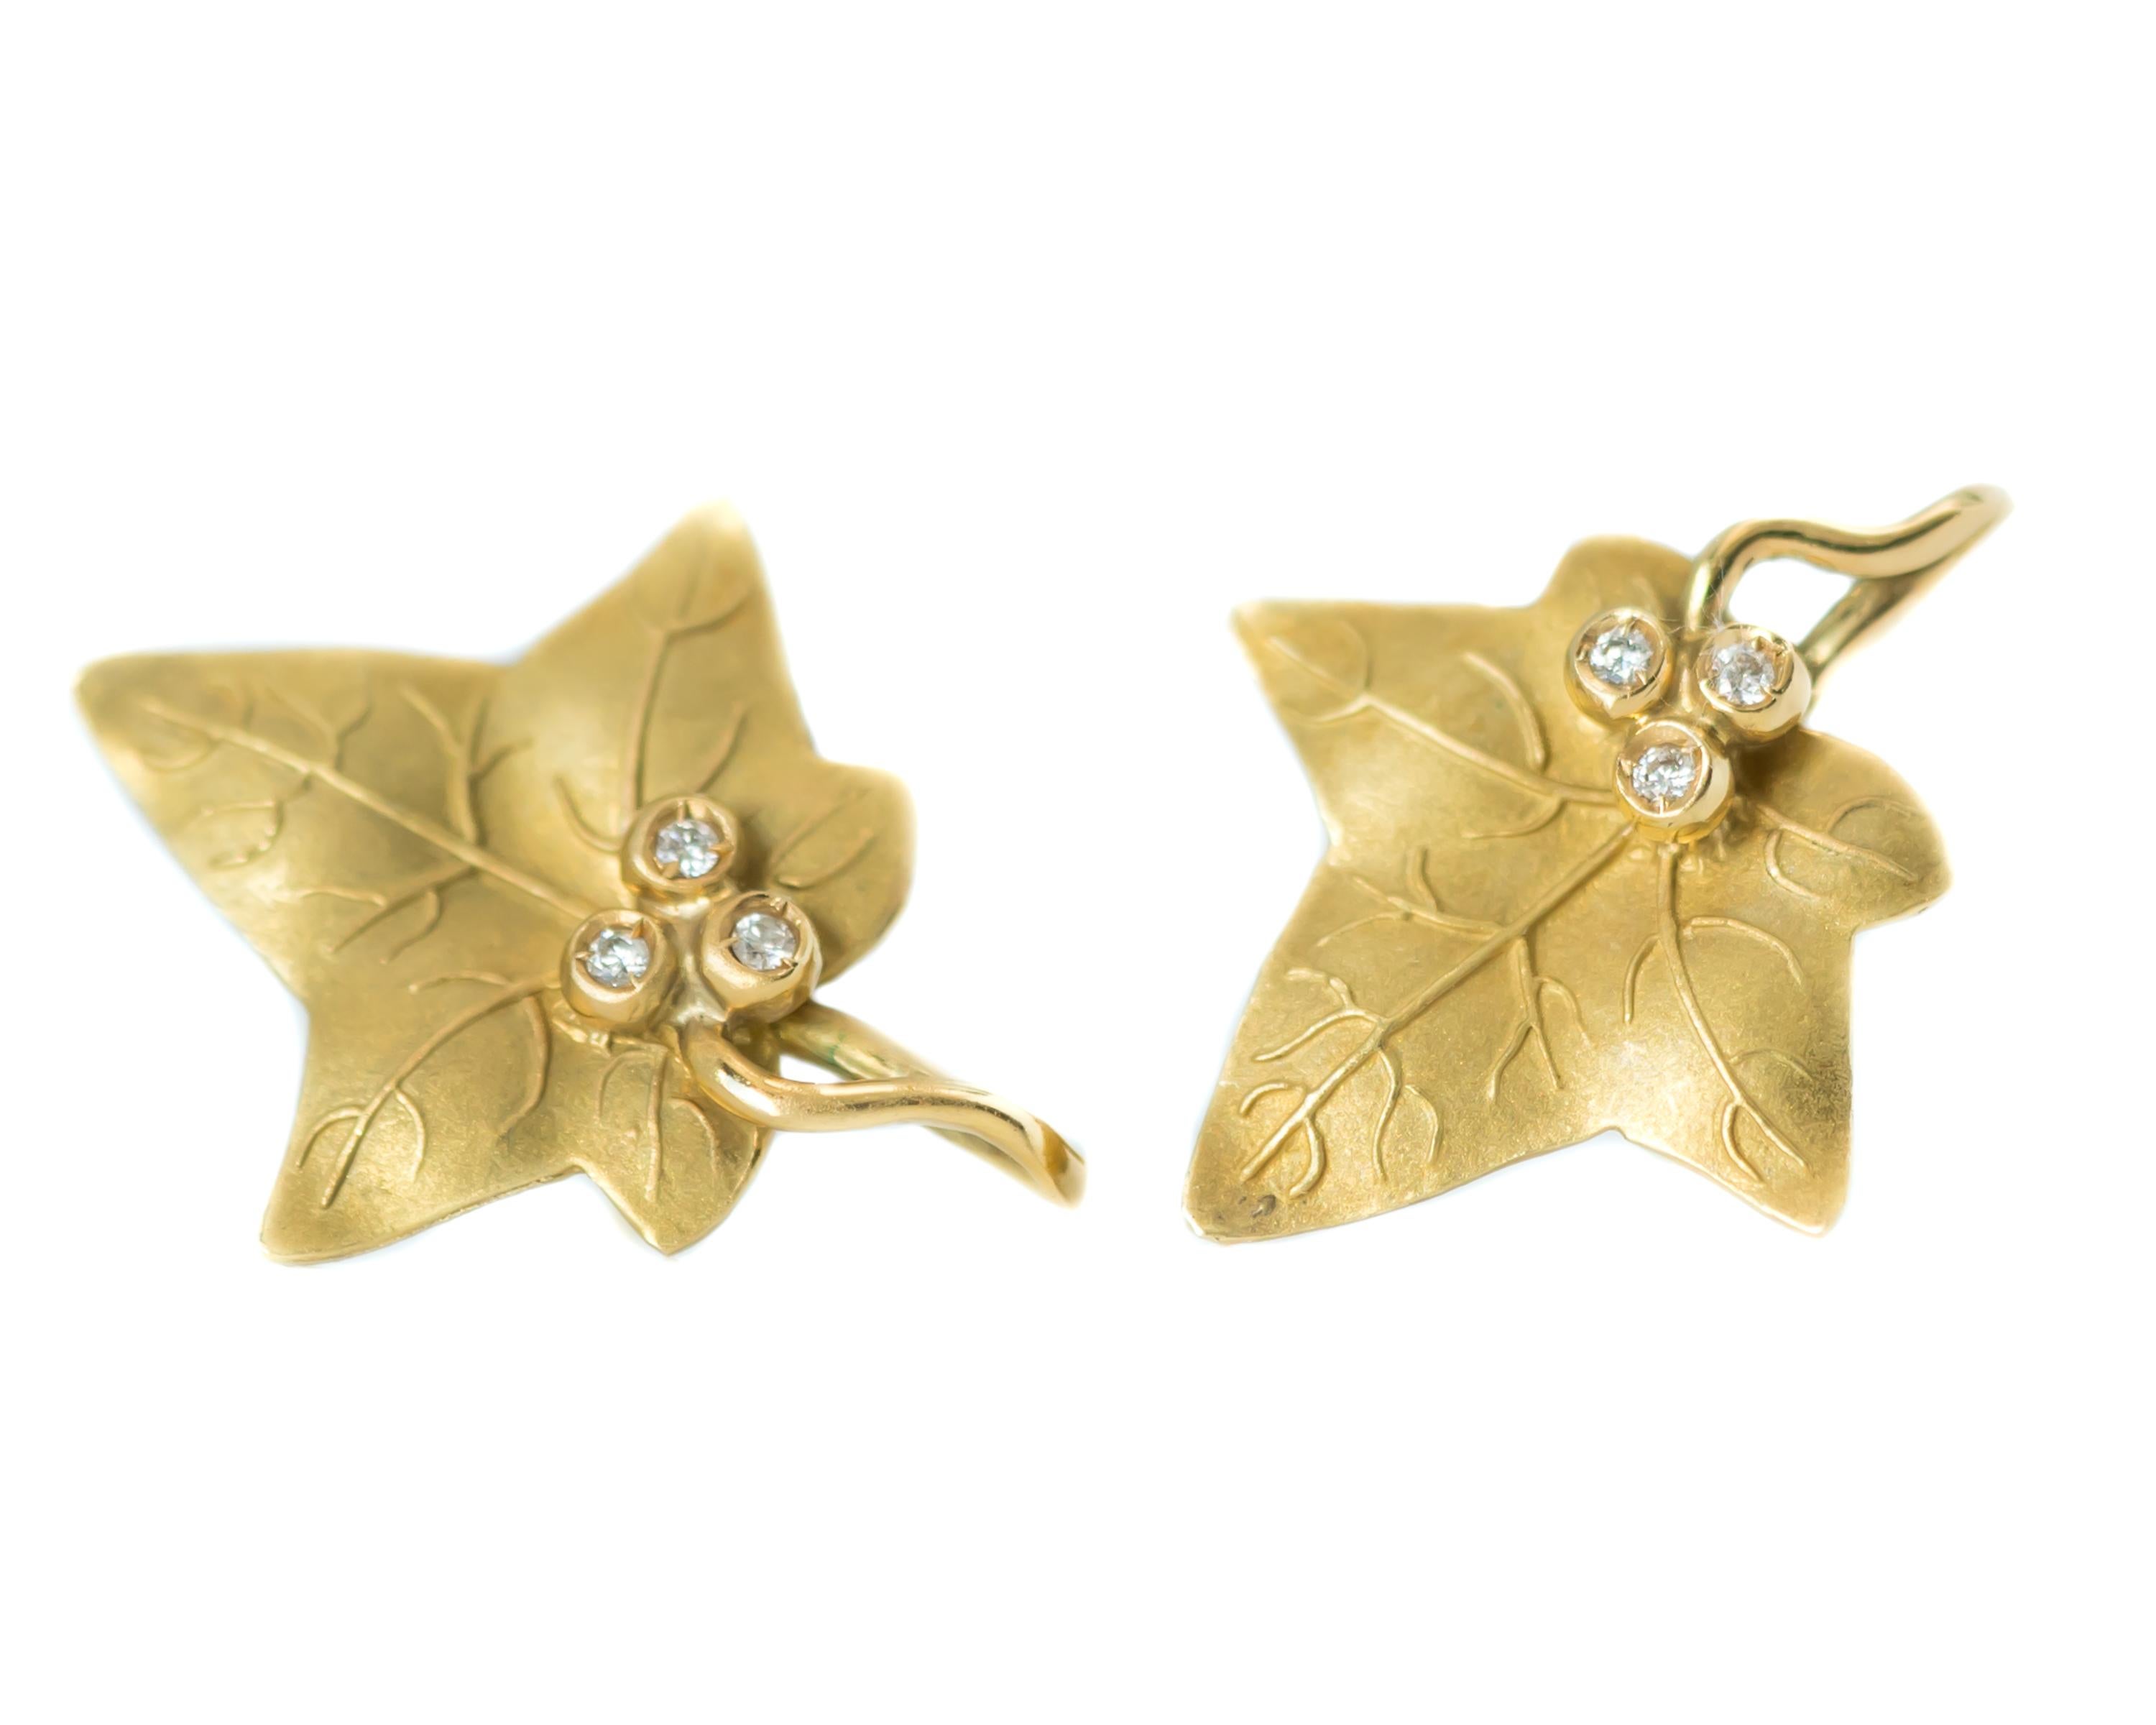 1940s Retro Maple Leaf Earrings - 18 Karat Yellow Gold, Diamonds

Features:
0.10 carat total Diamonds
Matte Textured 18 Karat Yellow Gold Leaf Shape
Leaves have fine Vein Detail with Stem Accents
Each leaf has 3 Round Brilliant Diamonds clustered in